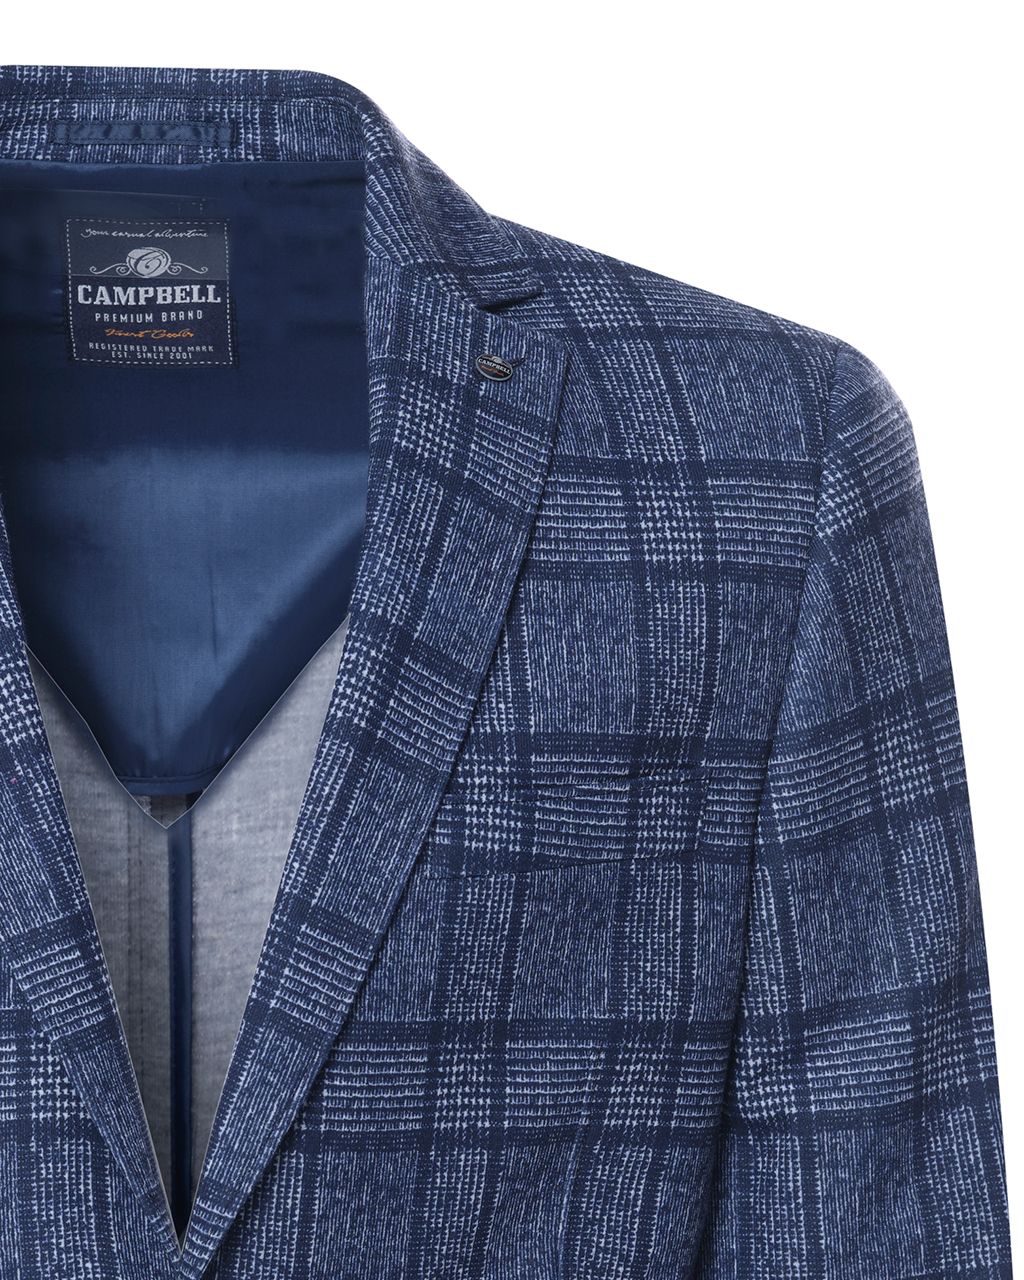 Campbell Classic Blazer Donkerblauw grote ruit 073066-003-48